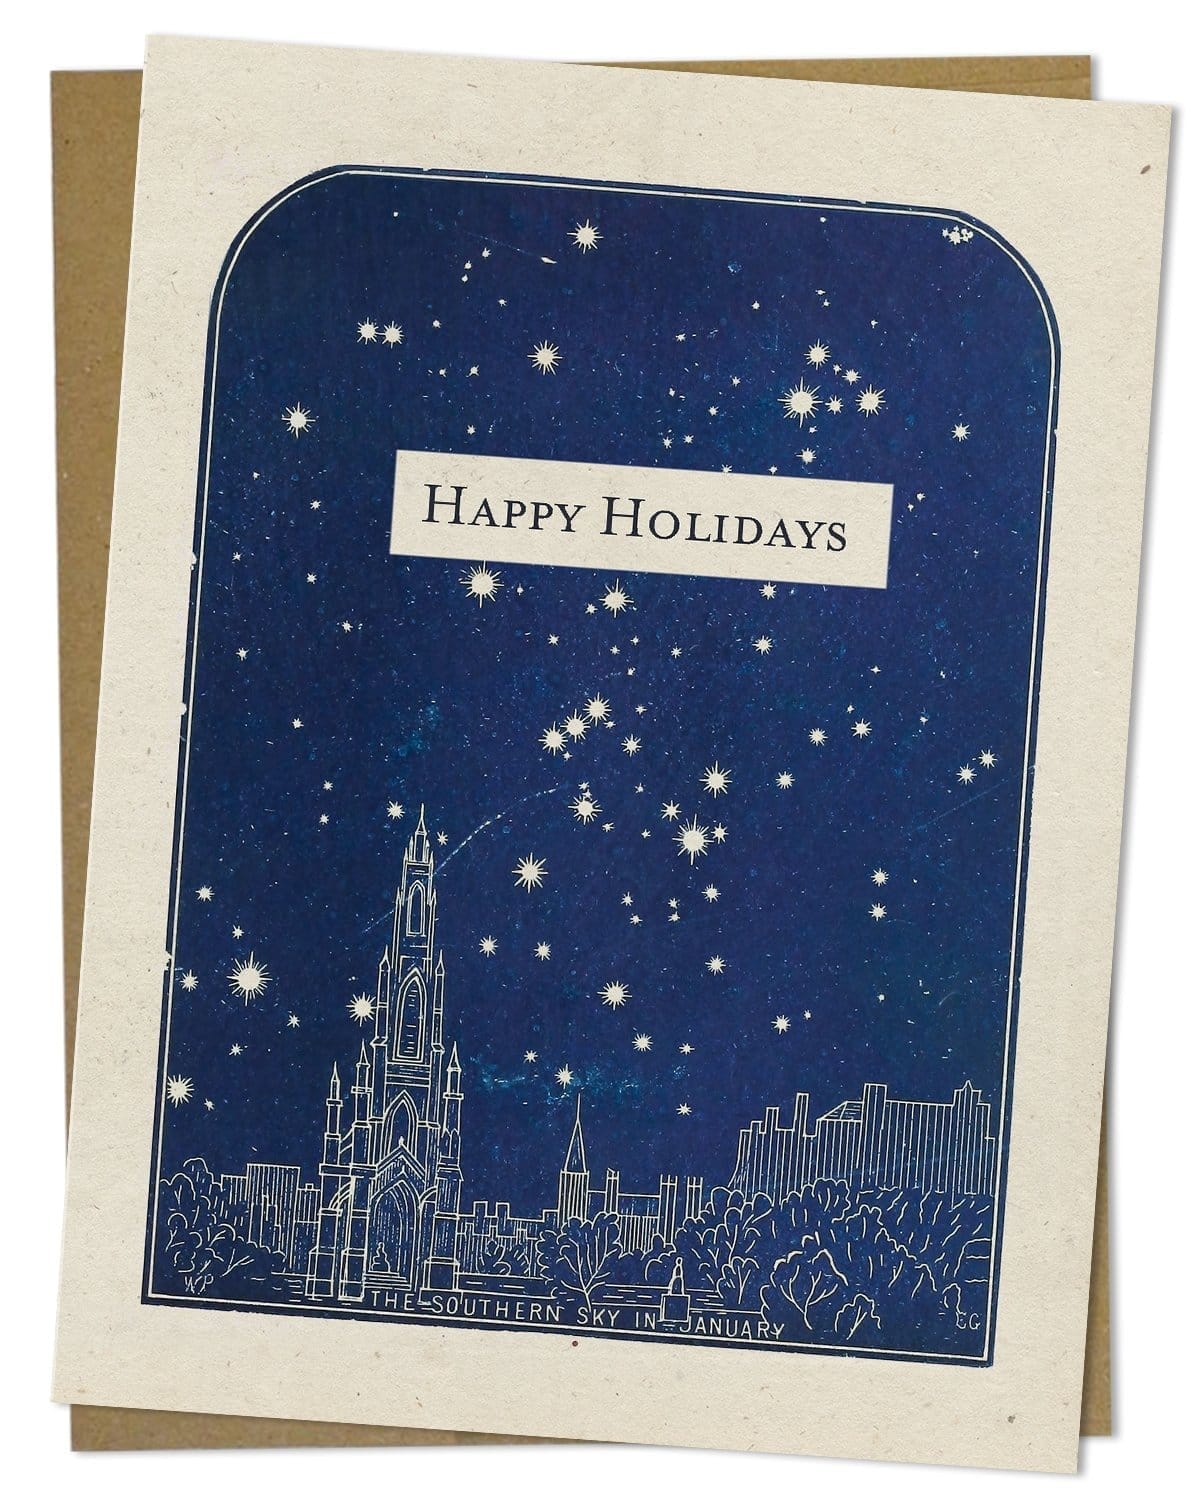 Southern Sky Greeting Card